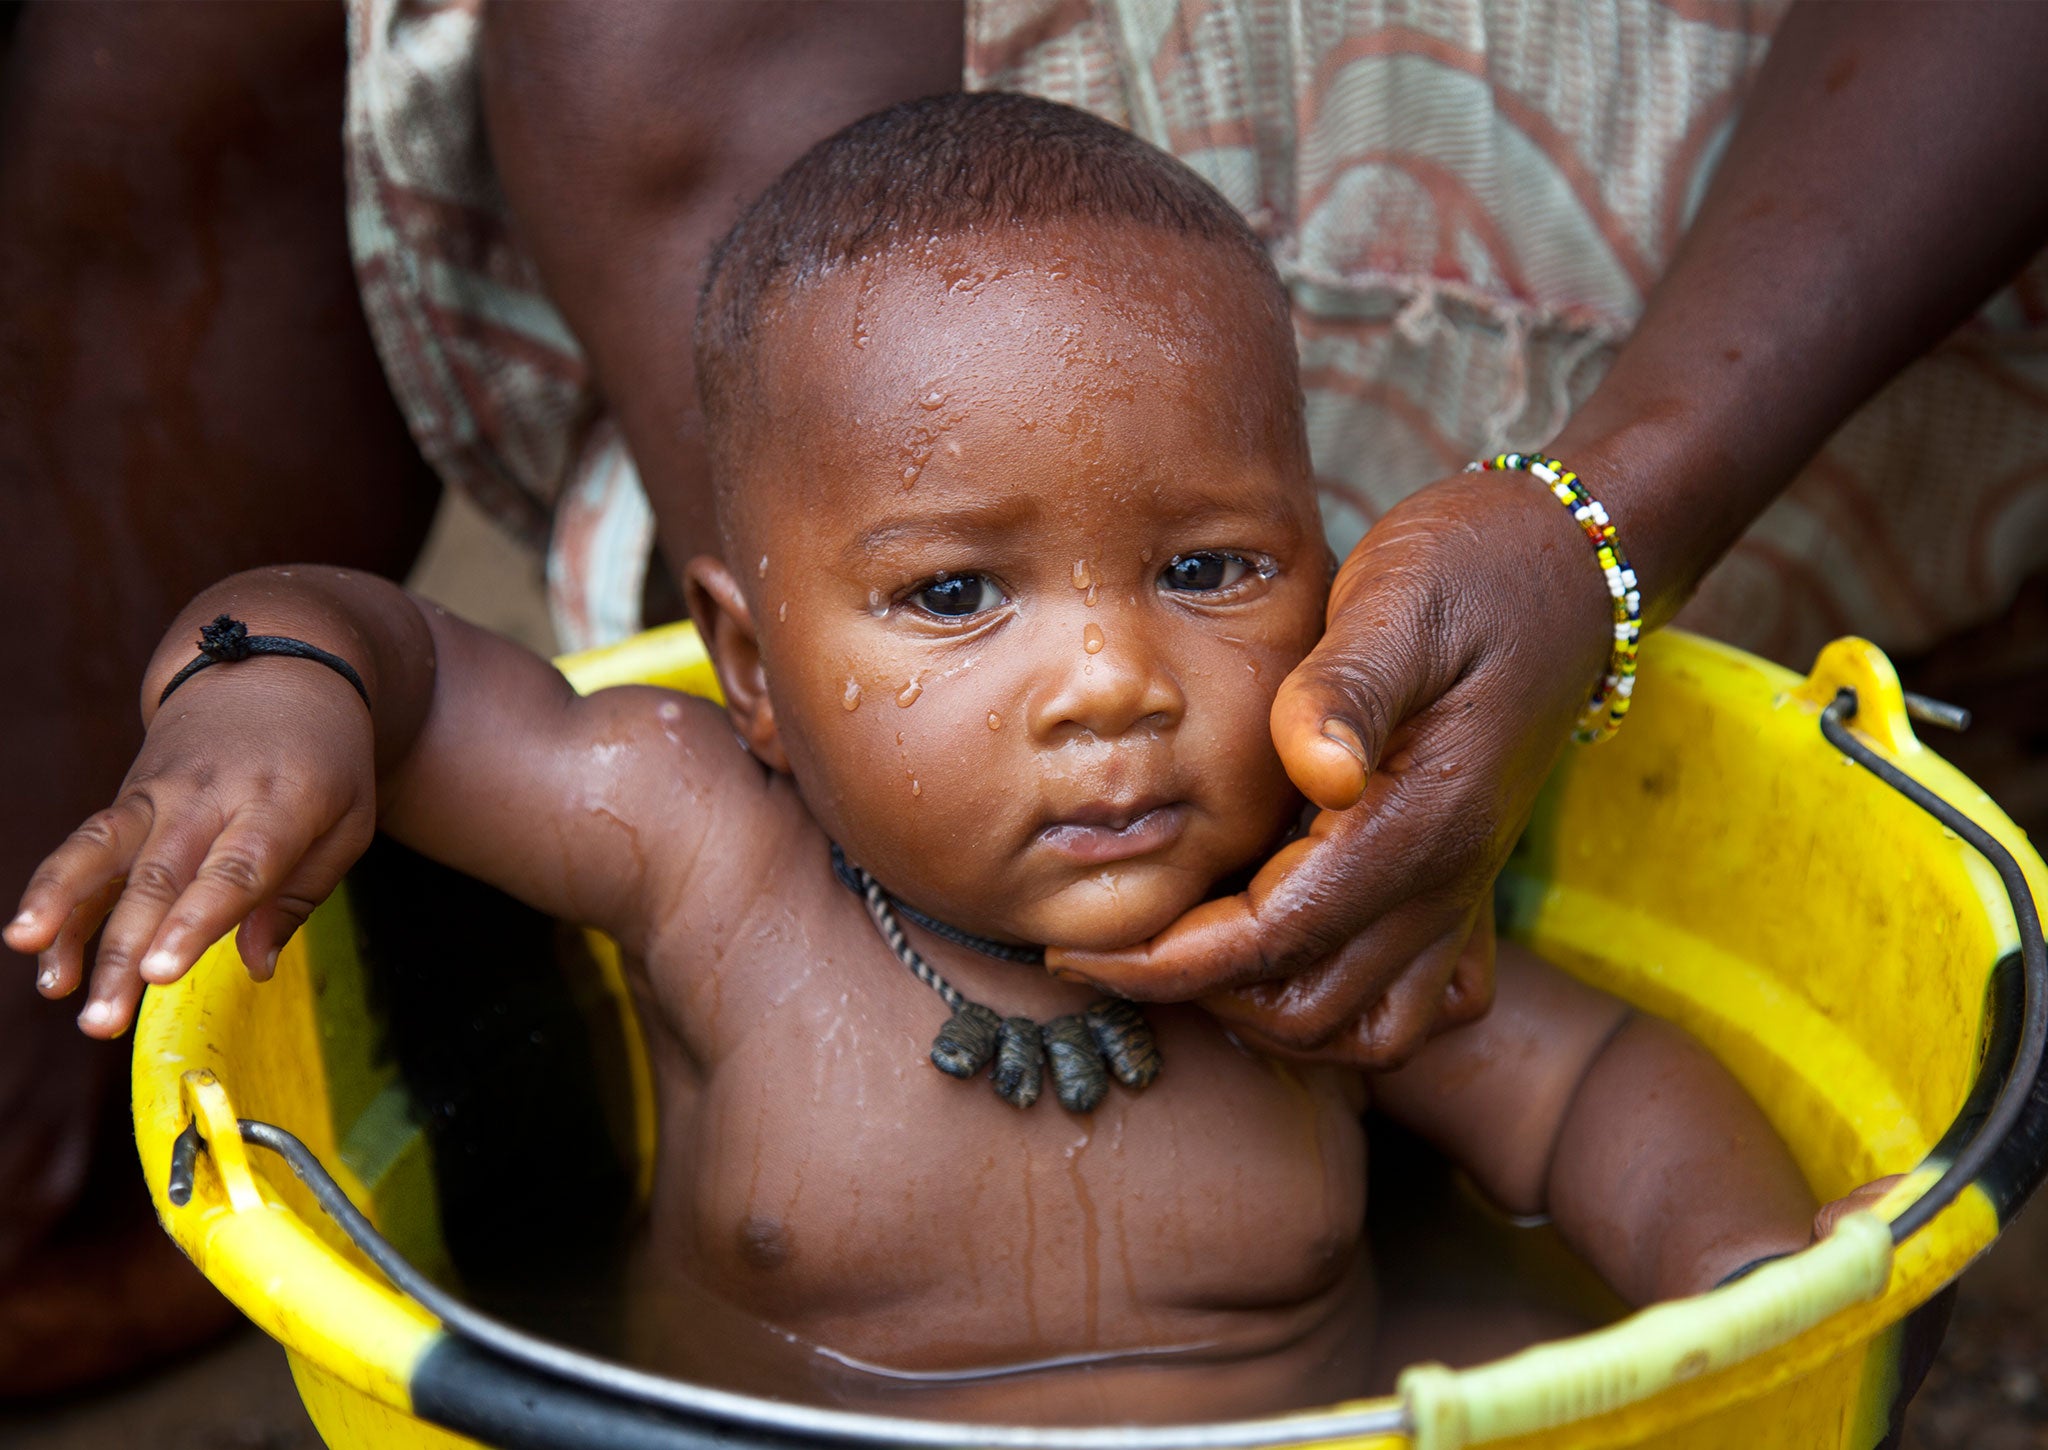 A baby is washed in safe clean water, in the village of Fayama, Sierra Leone, May 2013.